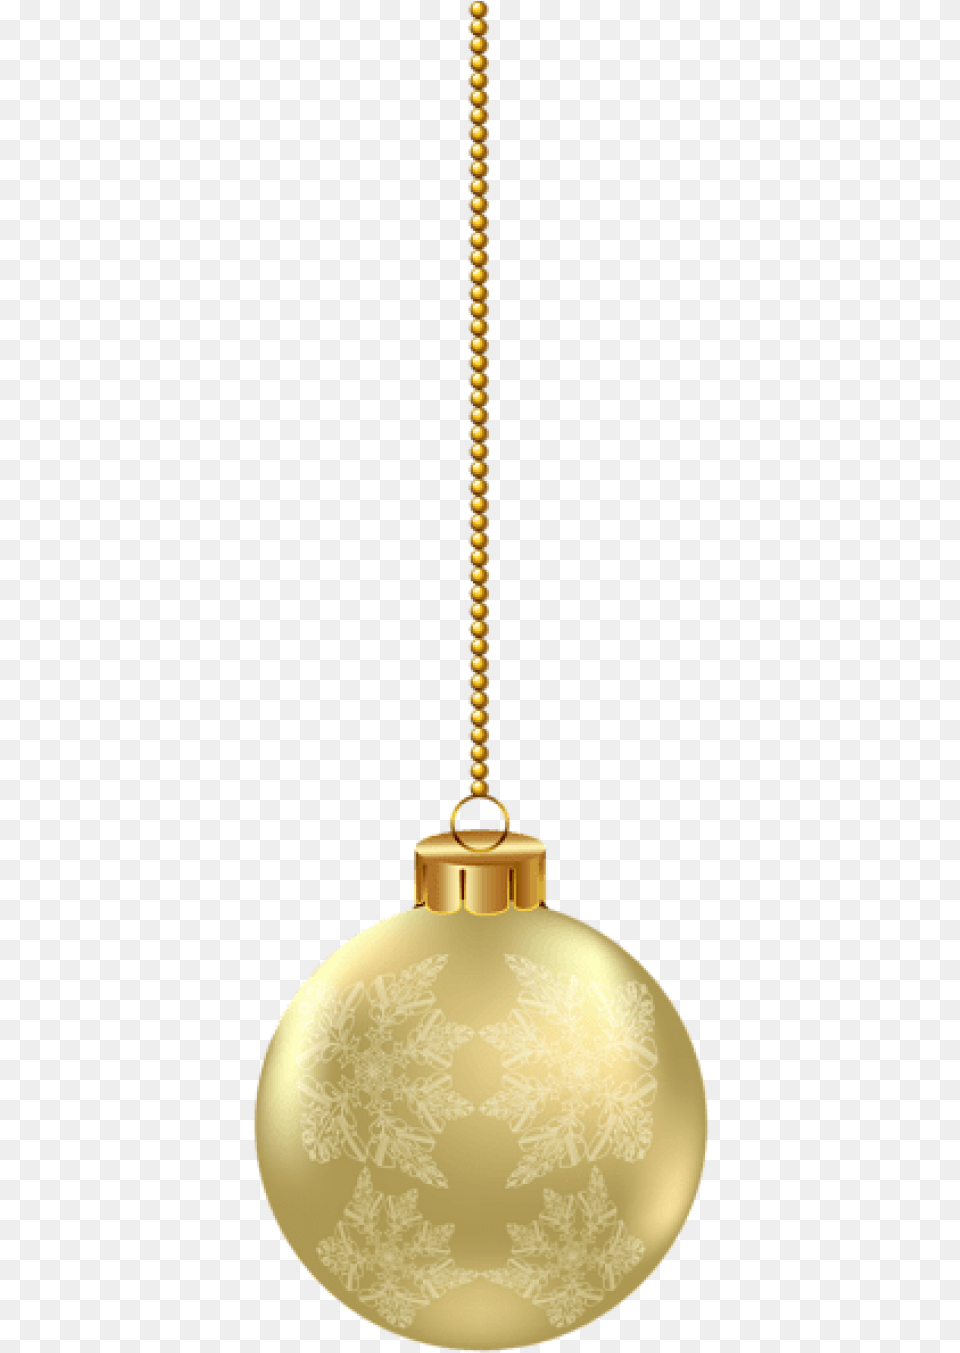 Free Hanging Christmas Ornament Images Transparent Hanging Christmas Decoration, Gold, Chandelier, Lamp, Light Fixture Png